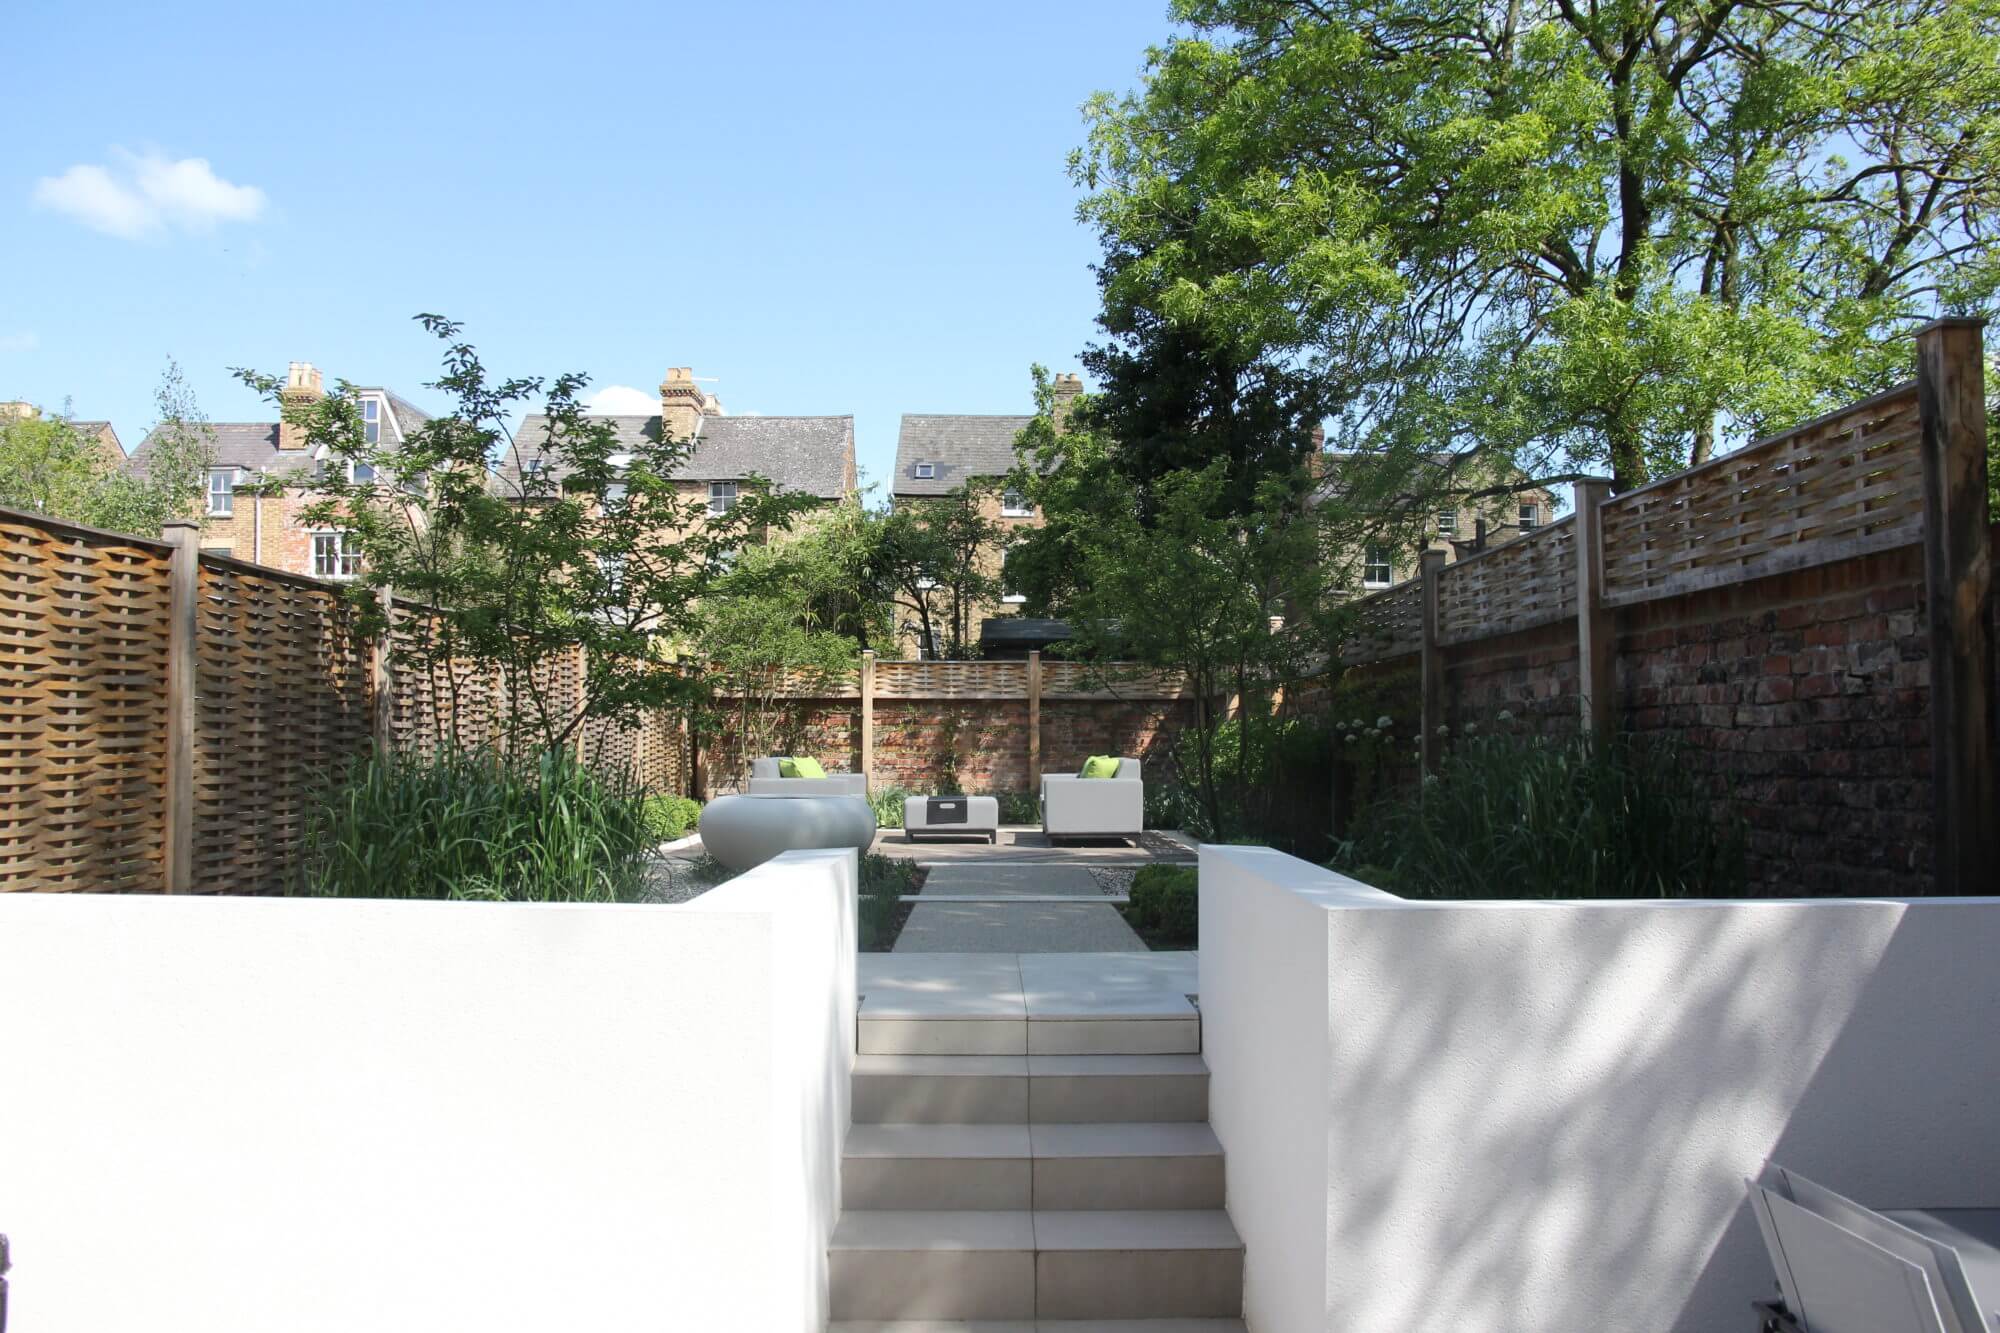 white rendered walls in a townhouse garden